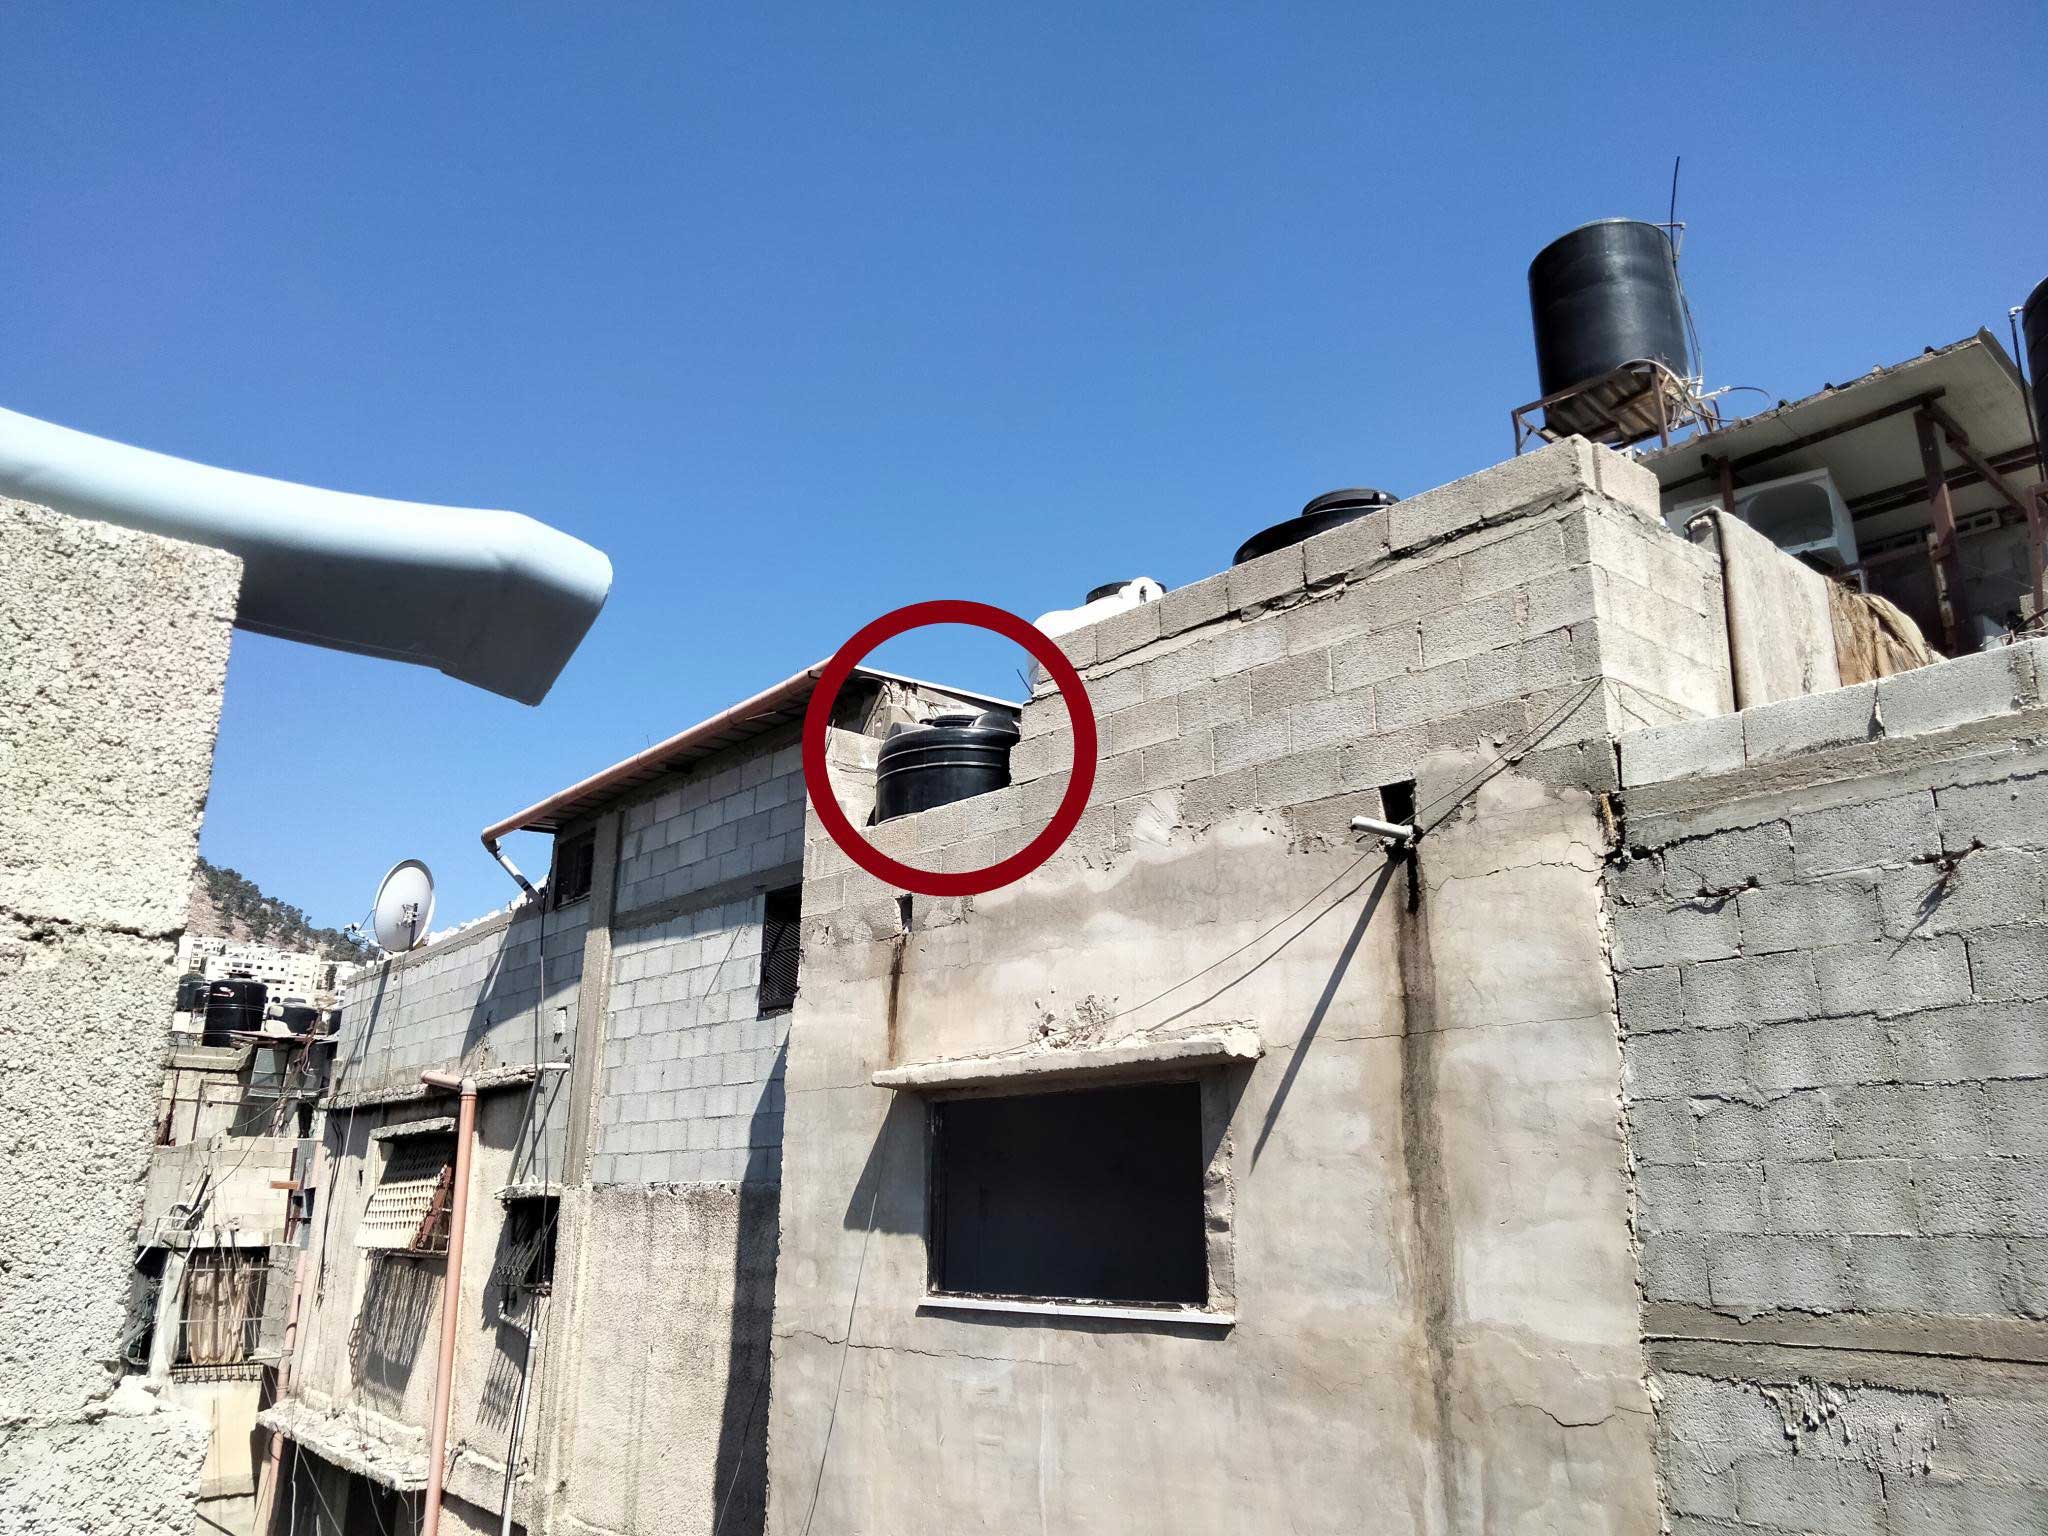 The place where ‘Imad al-Hashash was shot on the roof of his home. Photo by Salma a-Deb’i, B’Tselem, 24 Aug. 2021